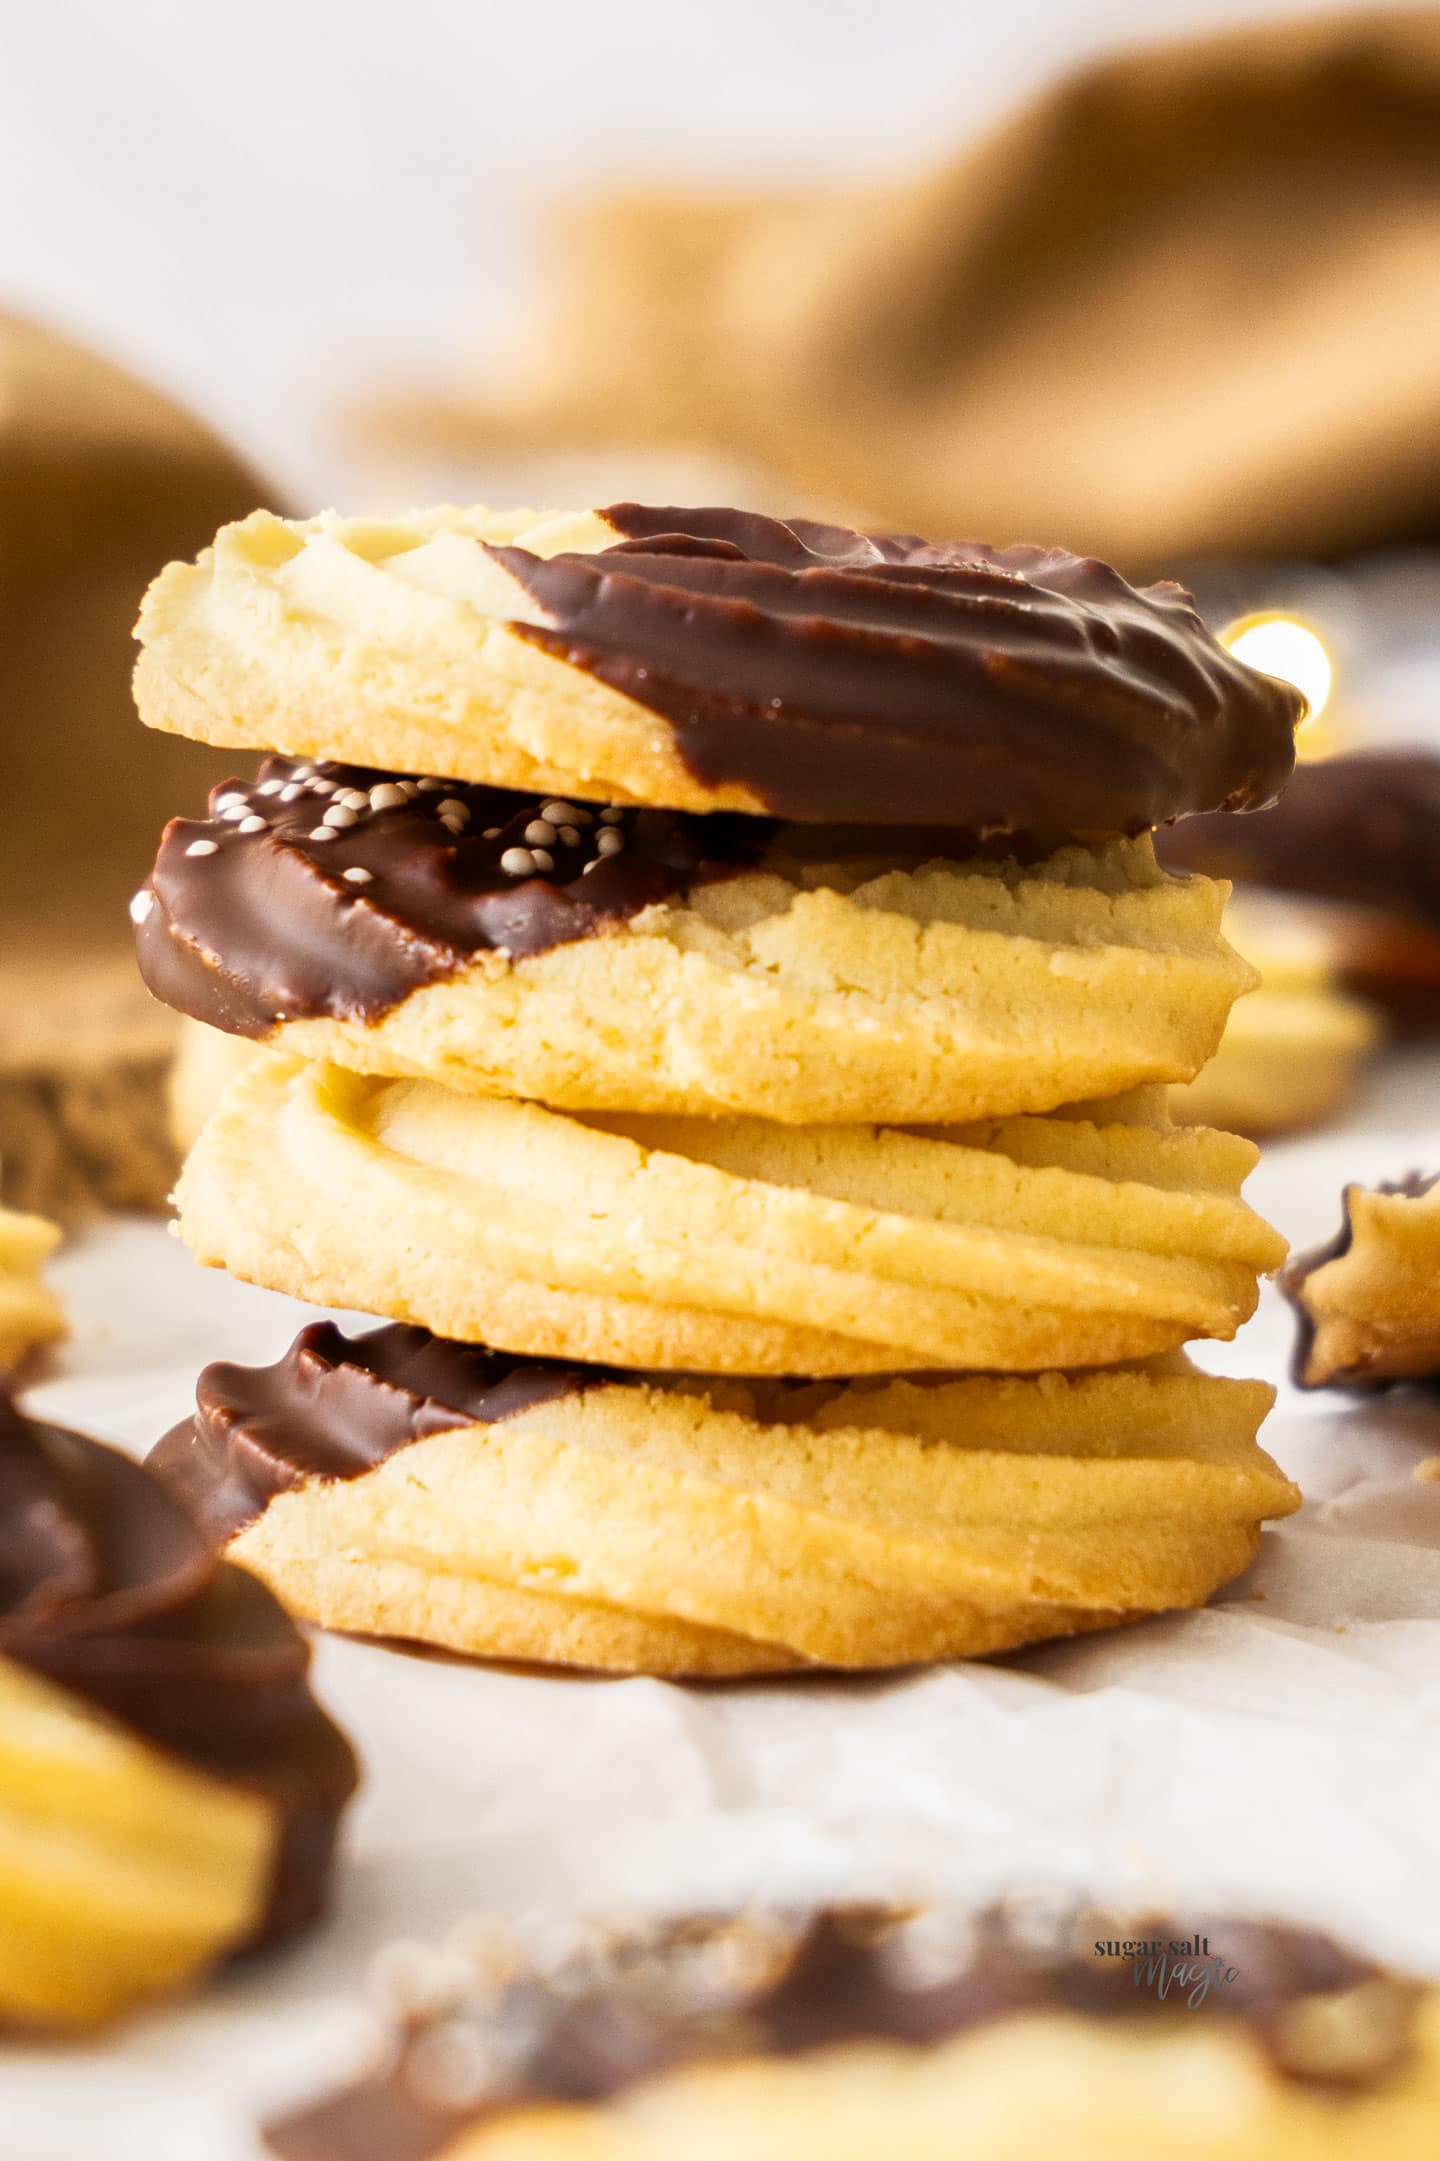 A stack of 4 Danish butter cookies.